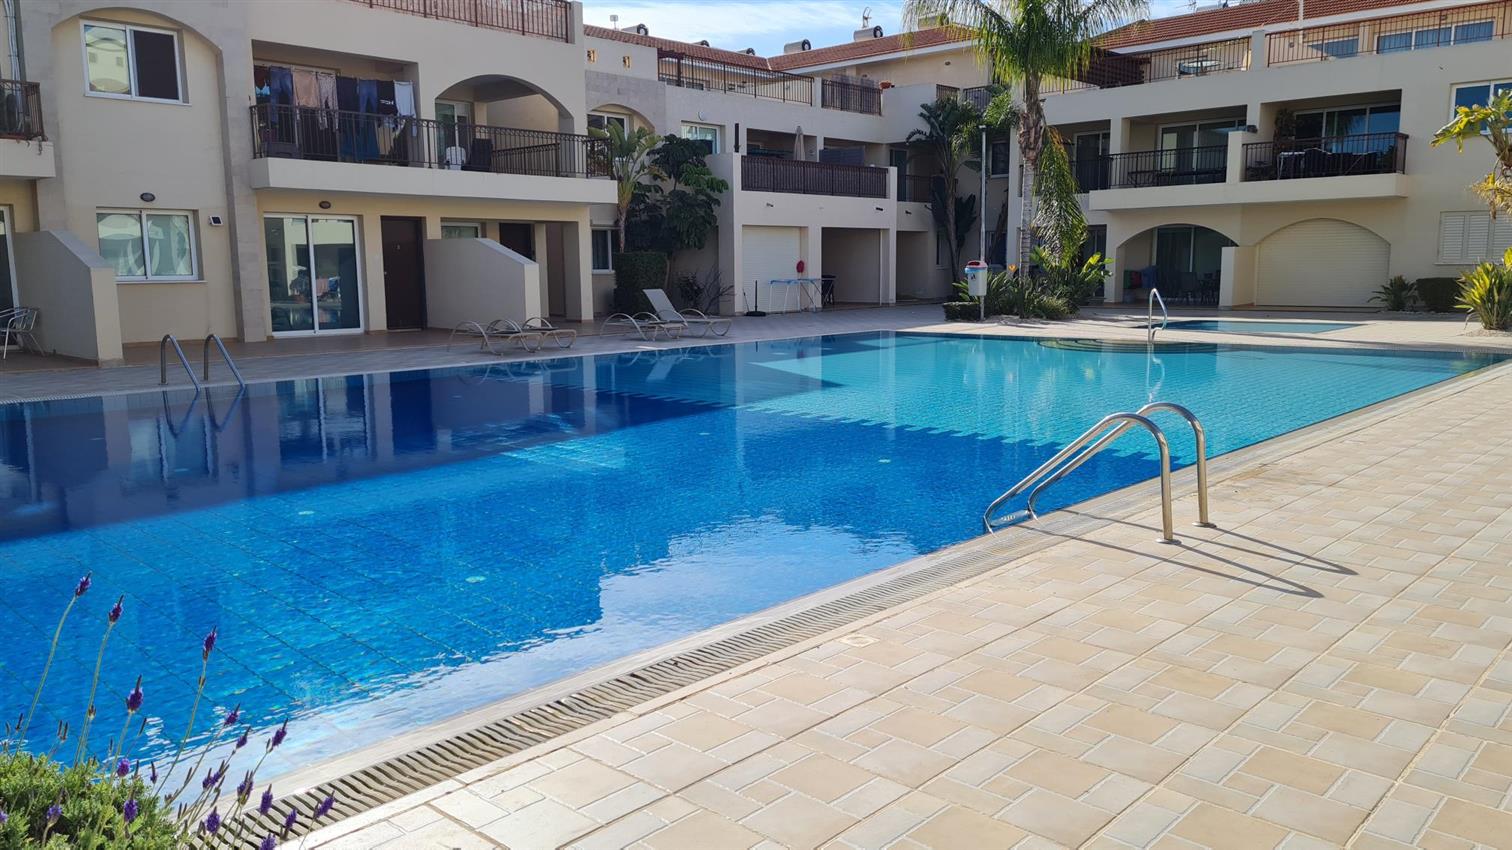 REF:  EGB5-6 Two Bed Apt, 2 bathrooms.  Nicely furnished.  Well maintained.  €575 pcm